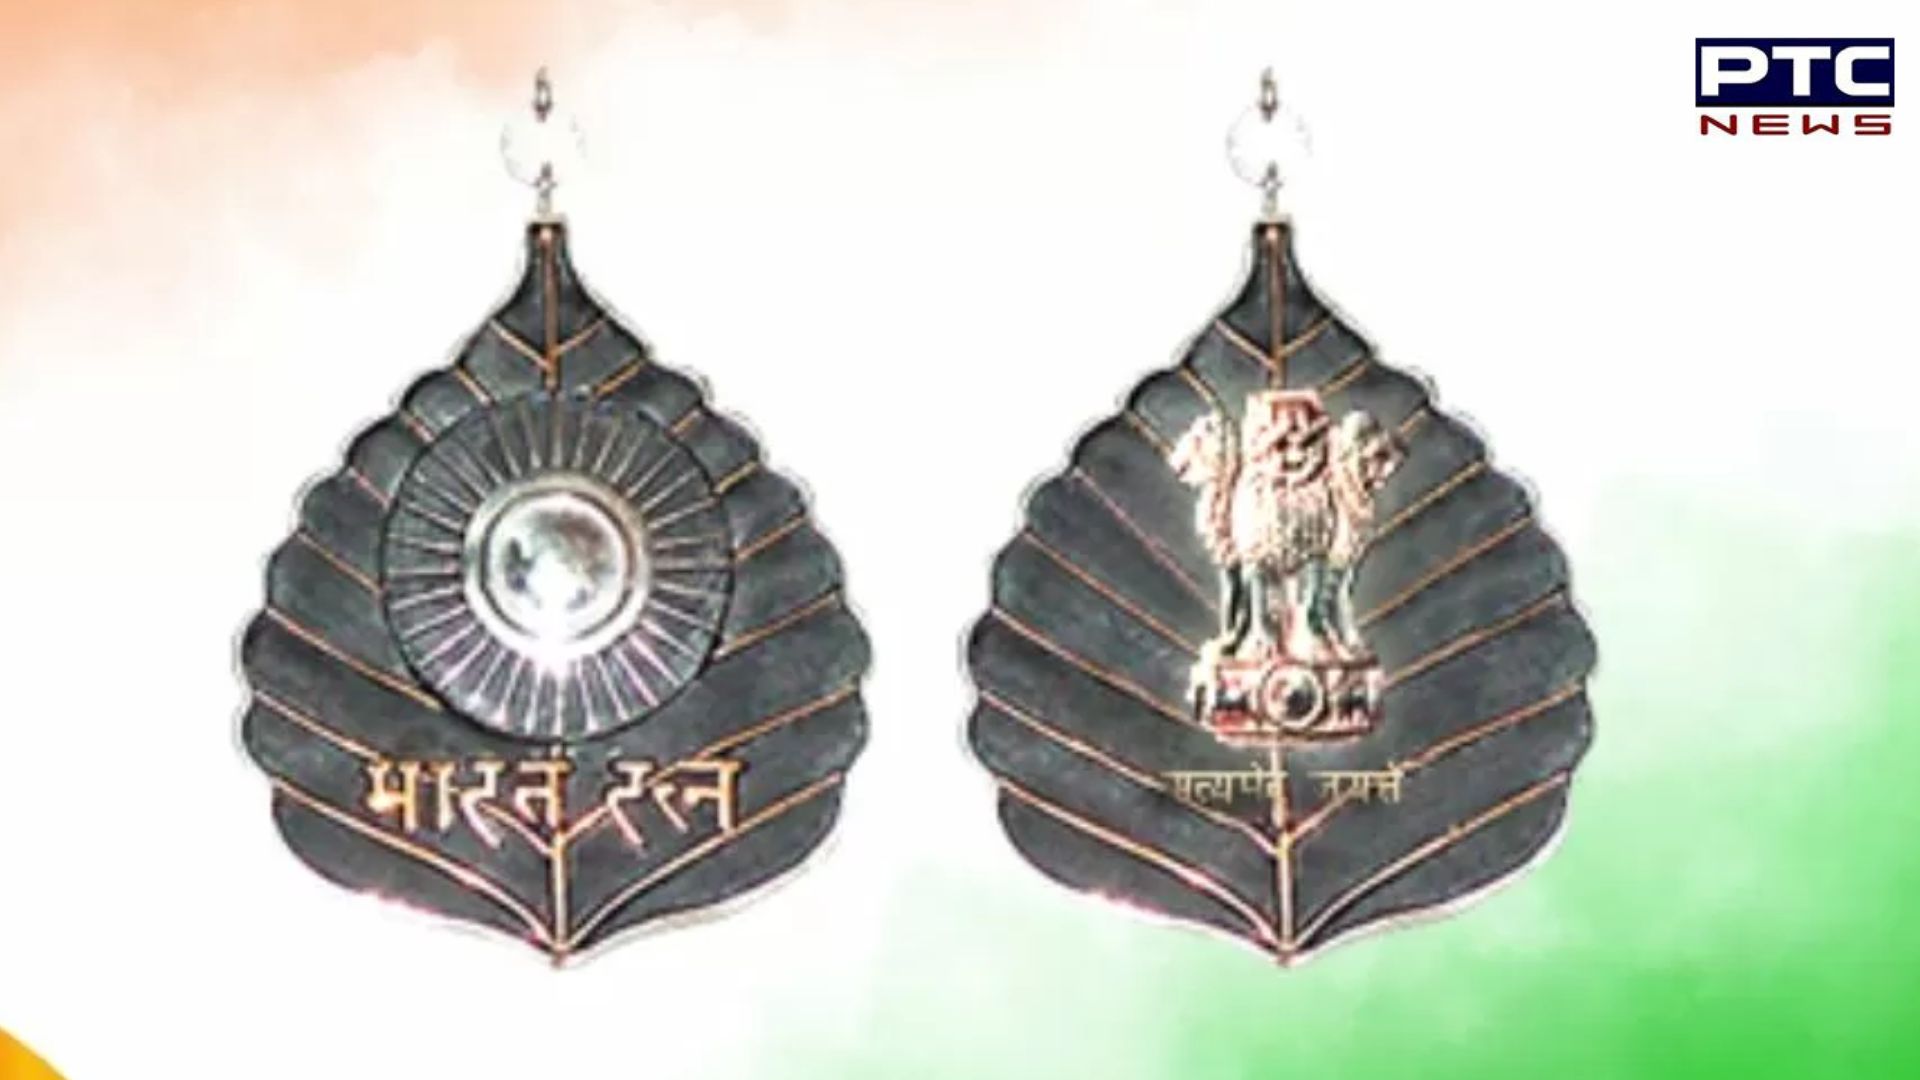 Bharat Ratna: Know all about India’s highest civilian award